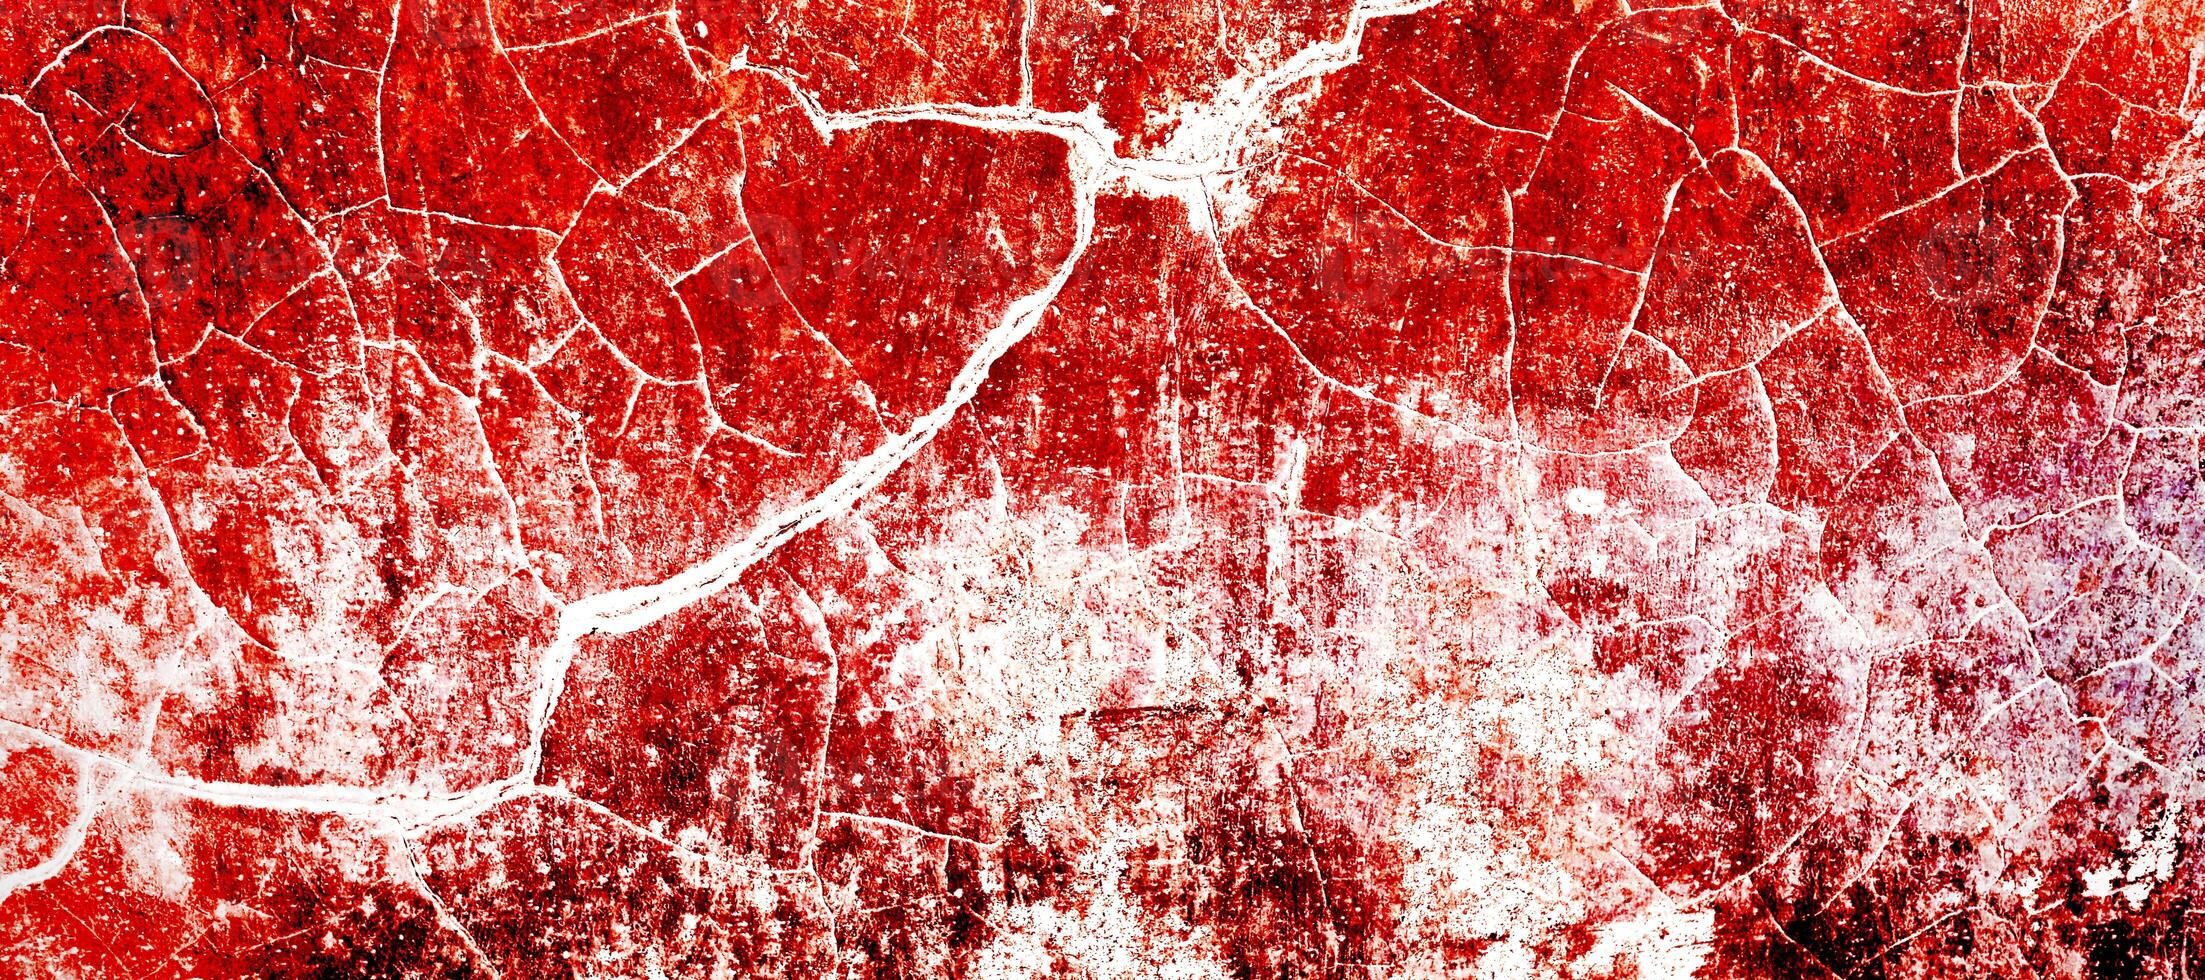 Red dirty wall grunge texture. Abstract scary concrete, Horror cement for background. old concrete wall. Grunge background for design. Distressed, blood, cracked, broken, crumbled photo